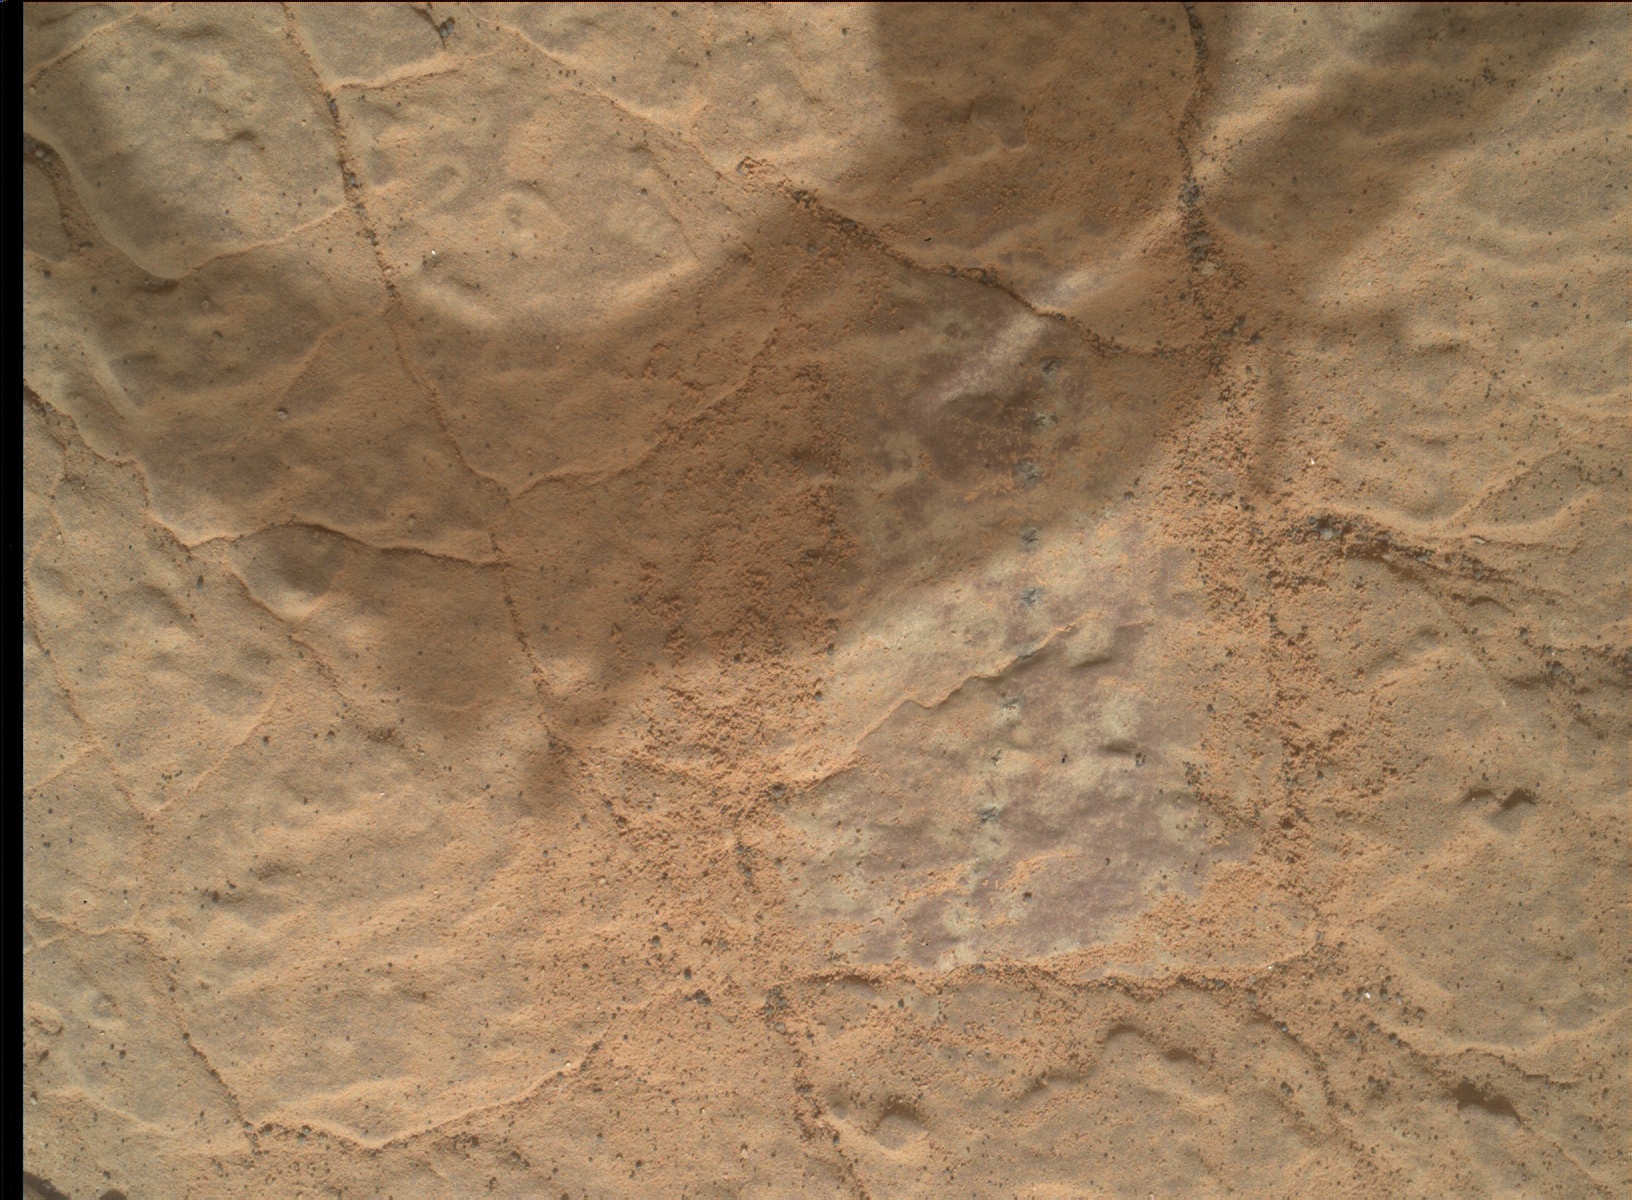 Nasa's Mars rover Curiosity acquired this image using its Mars Hand Lens Imager (MAHLI) on Sol 2792